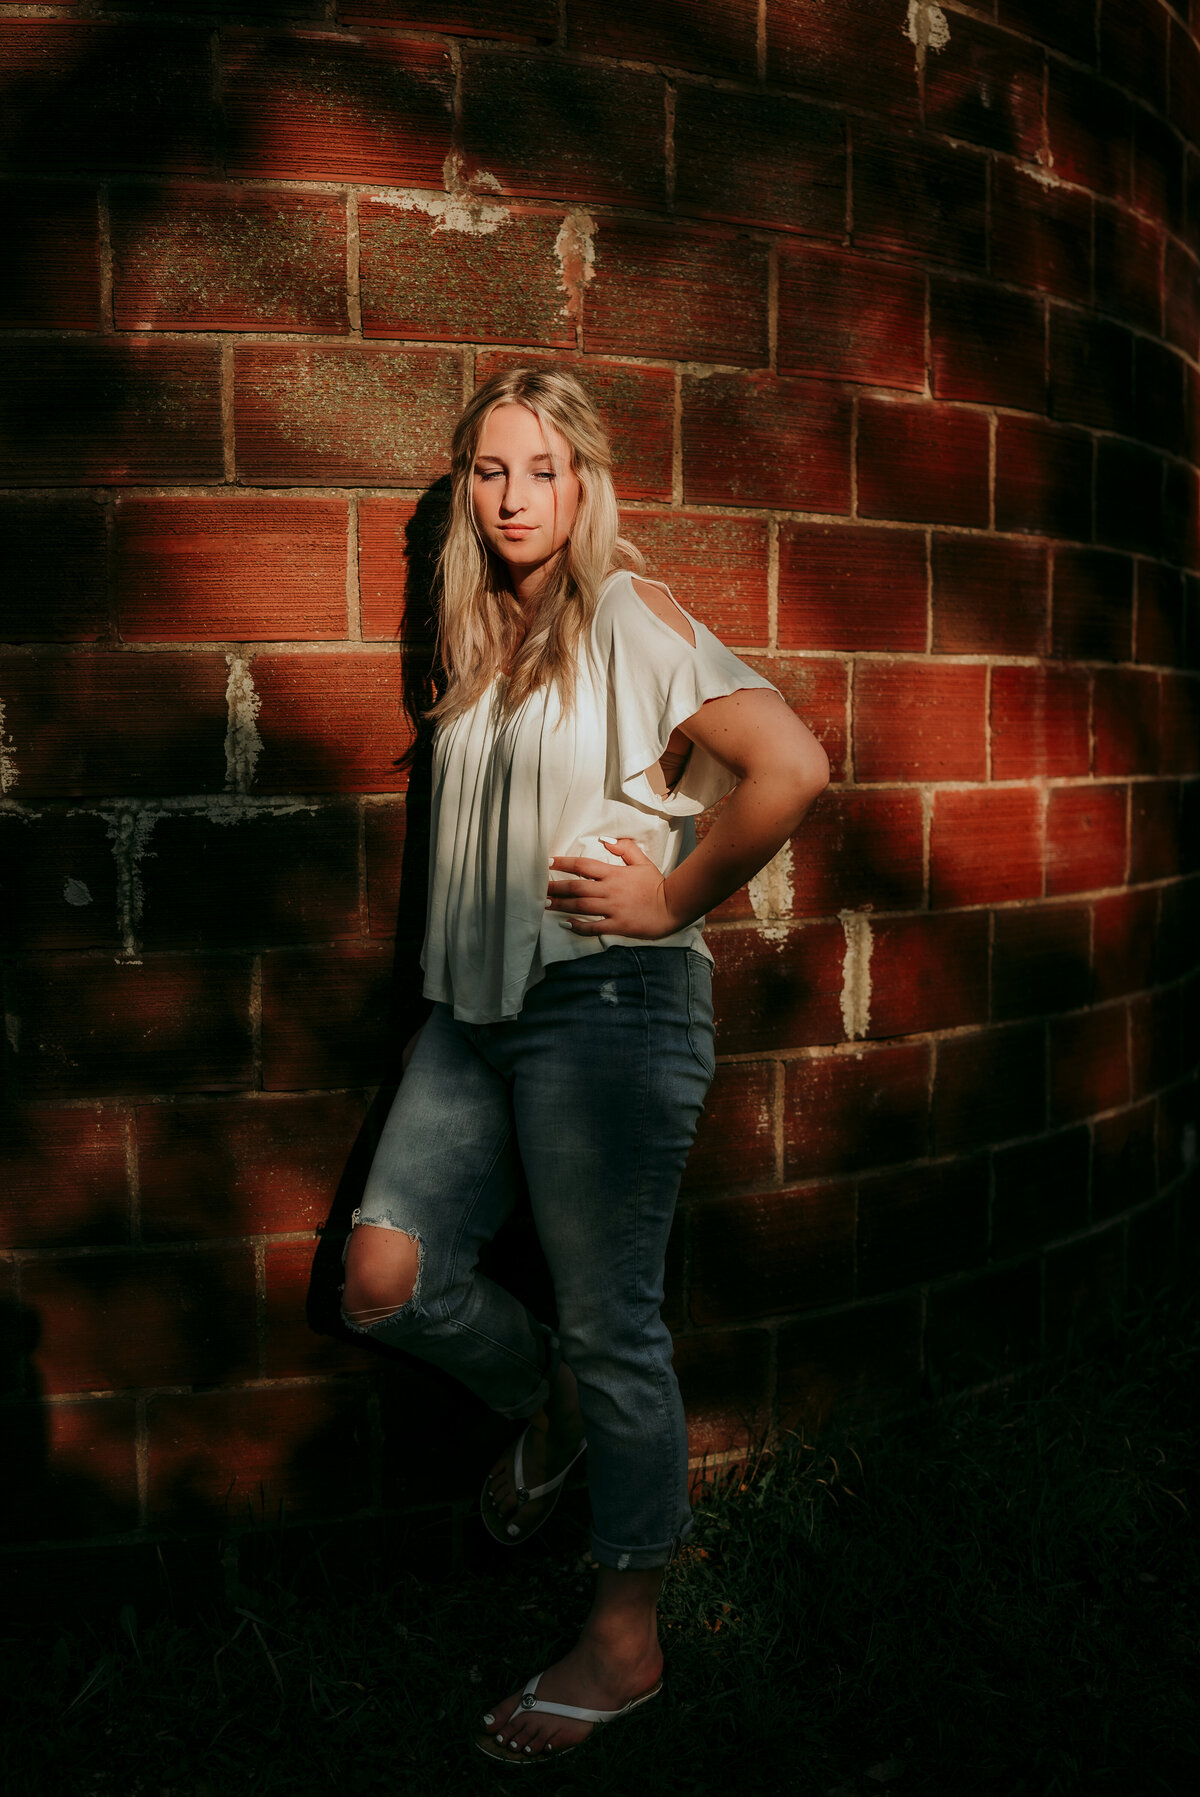 Embrace rustic radiance with Shannon Kathleen Photography's Minneapolis senior portraits. Bask in country chic allure. Secure your session for timeless charm